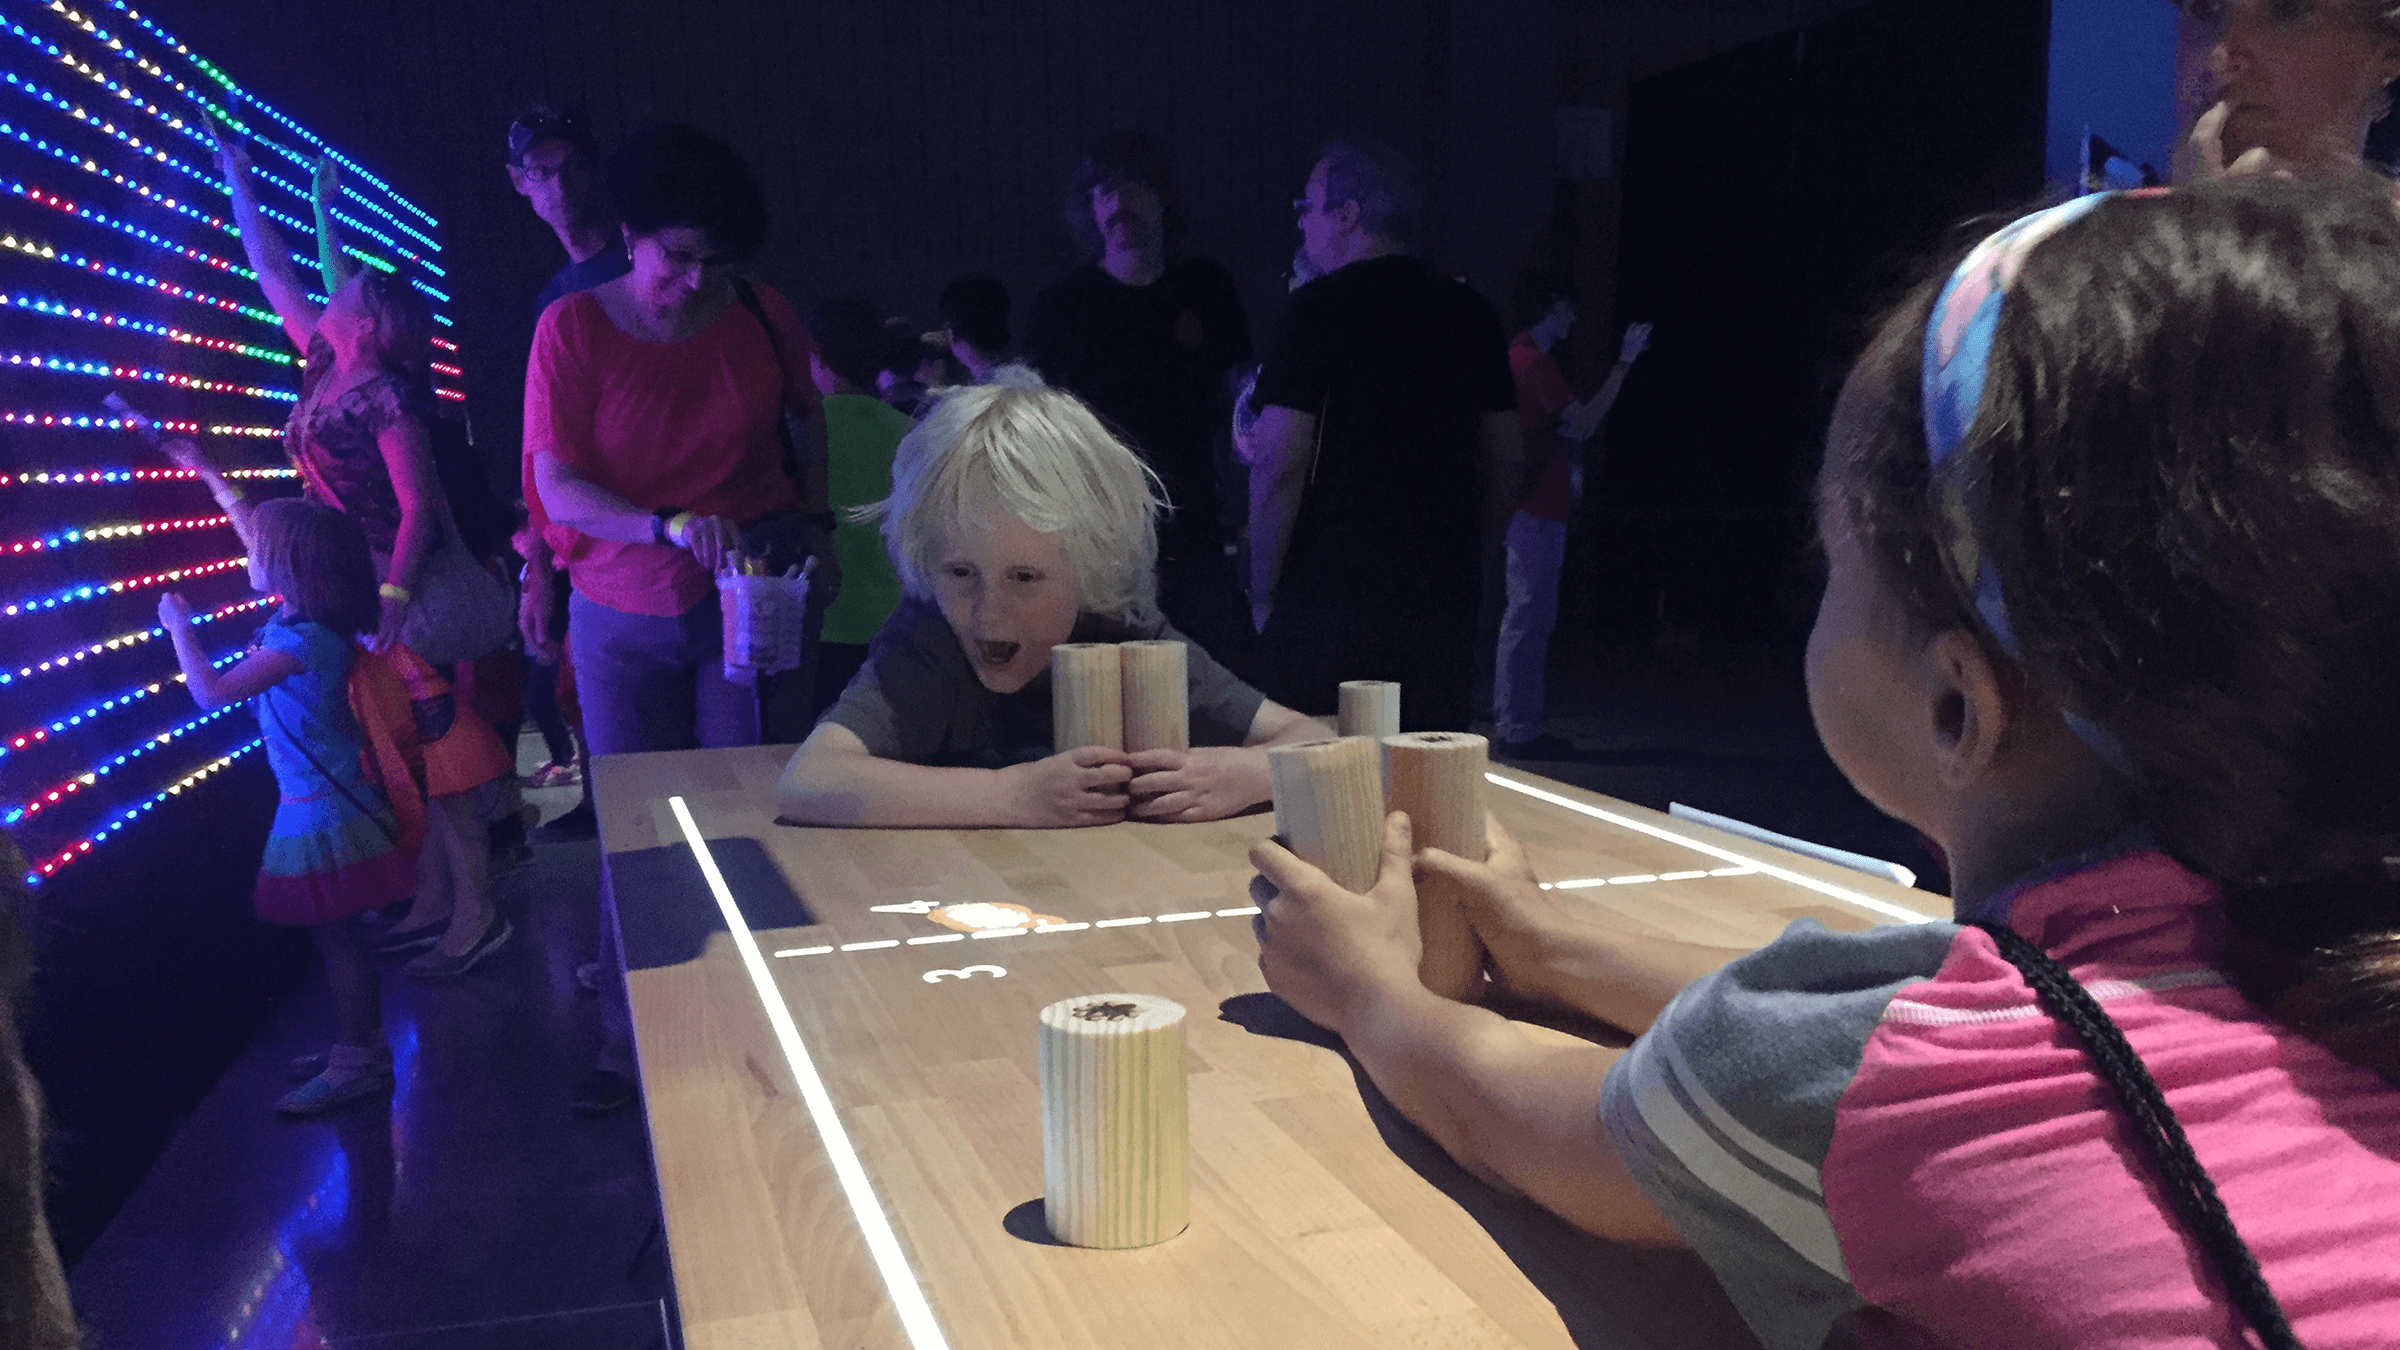 Two children play using interactive light on a wooden table during an event